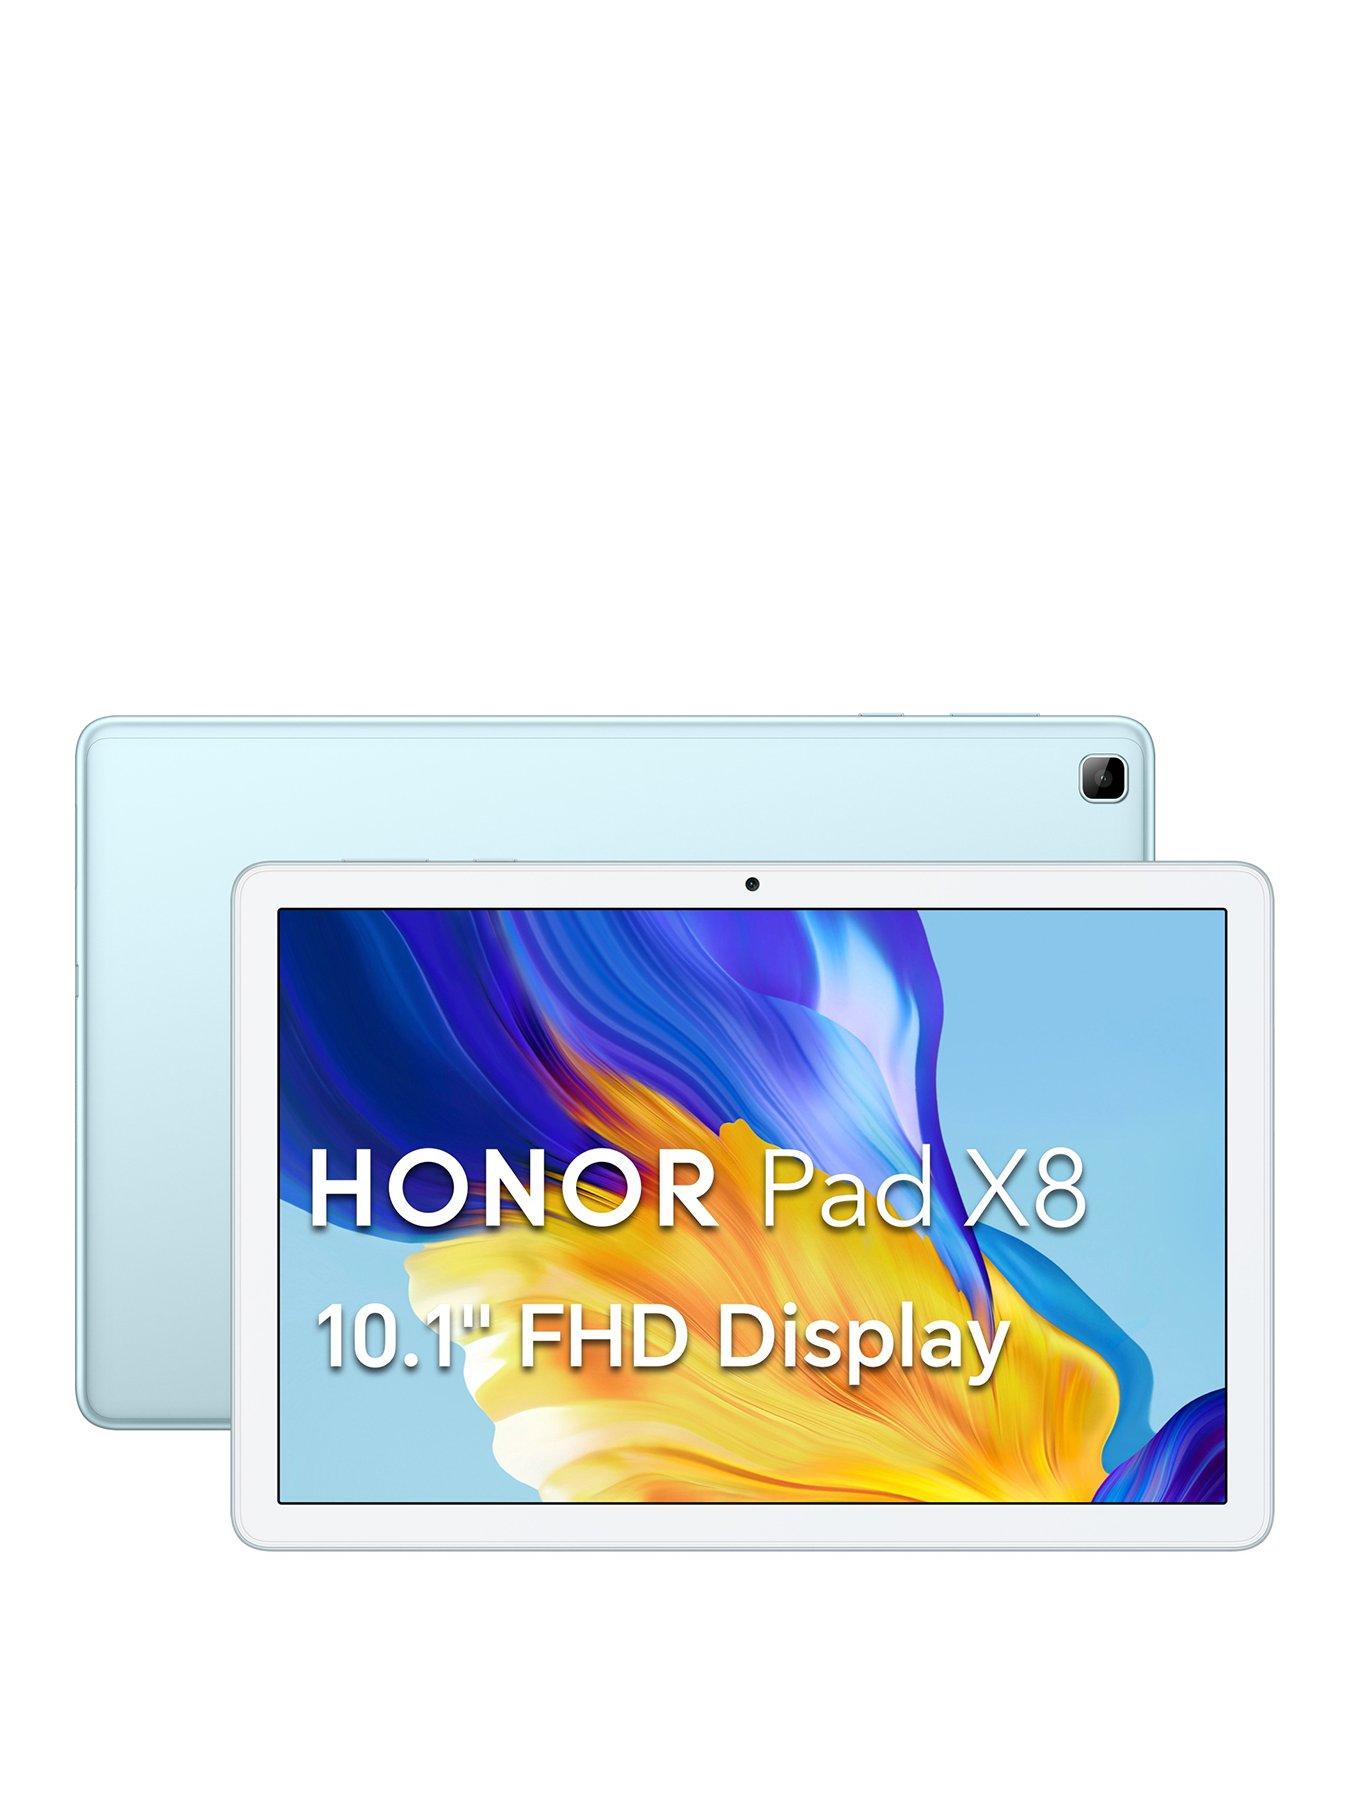 Honor 70 and Honor Pad 8 promise high specs for modest money